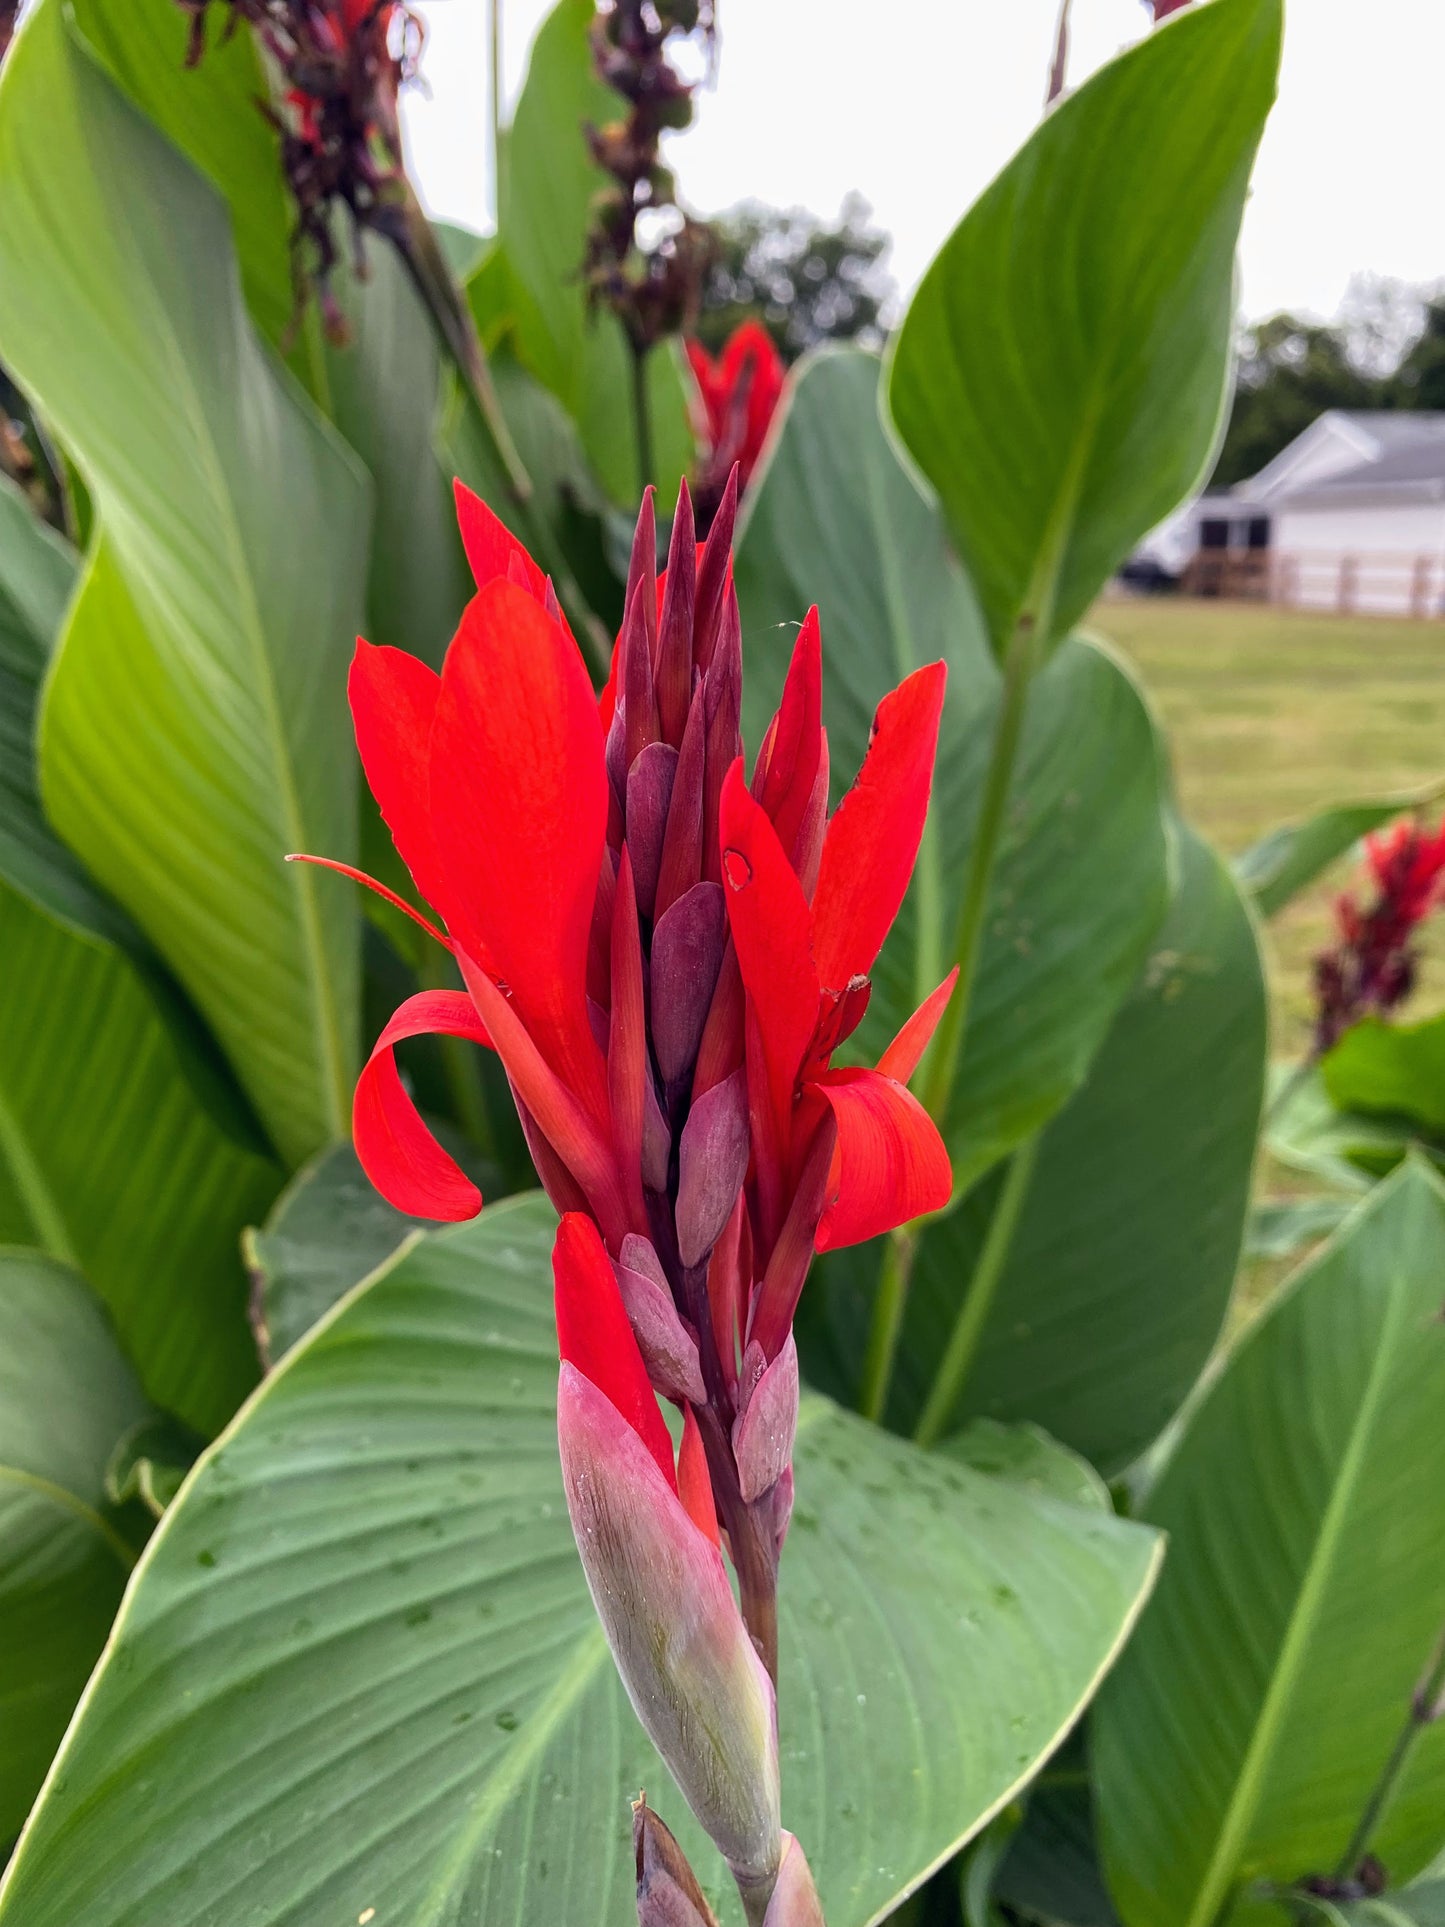 Red Canna lily – Growing Farmers